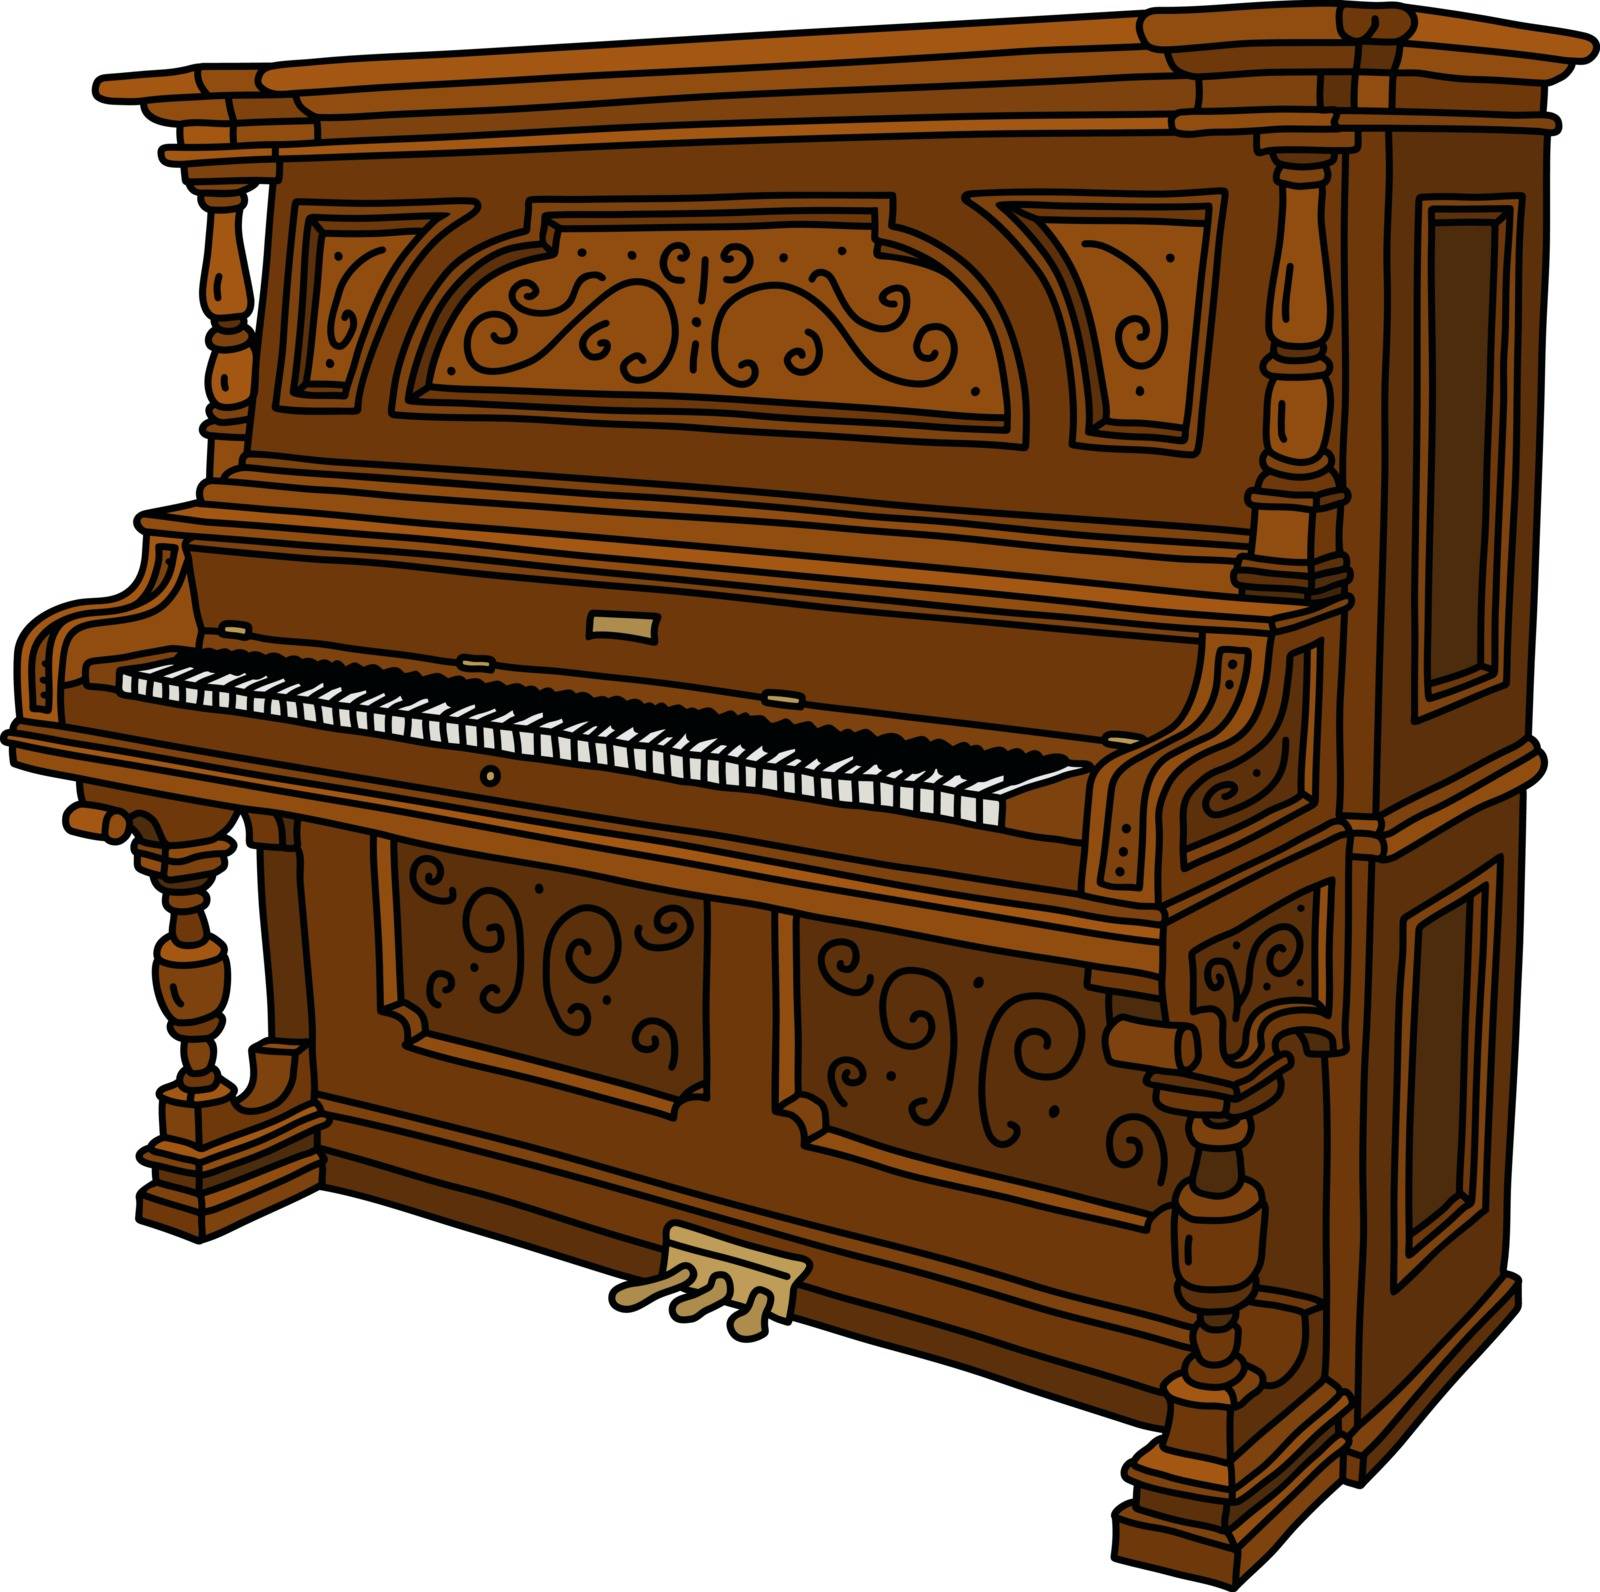 The historical brown pianino by vostal